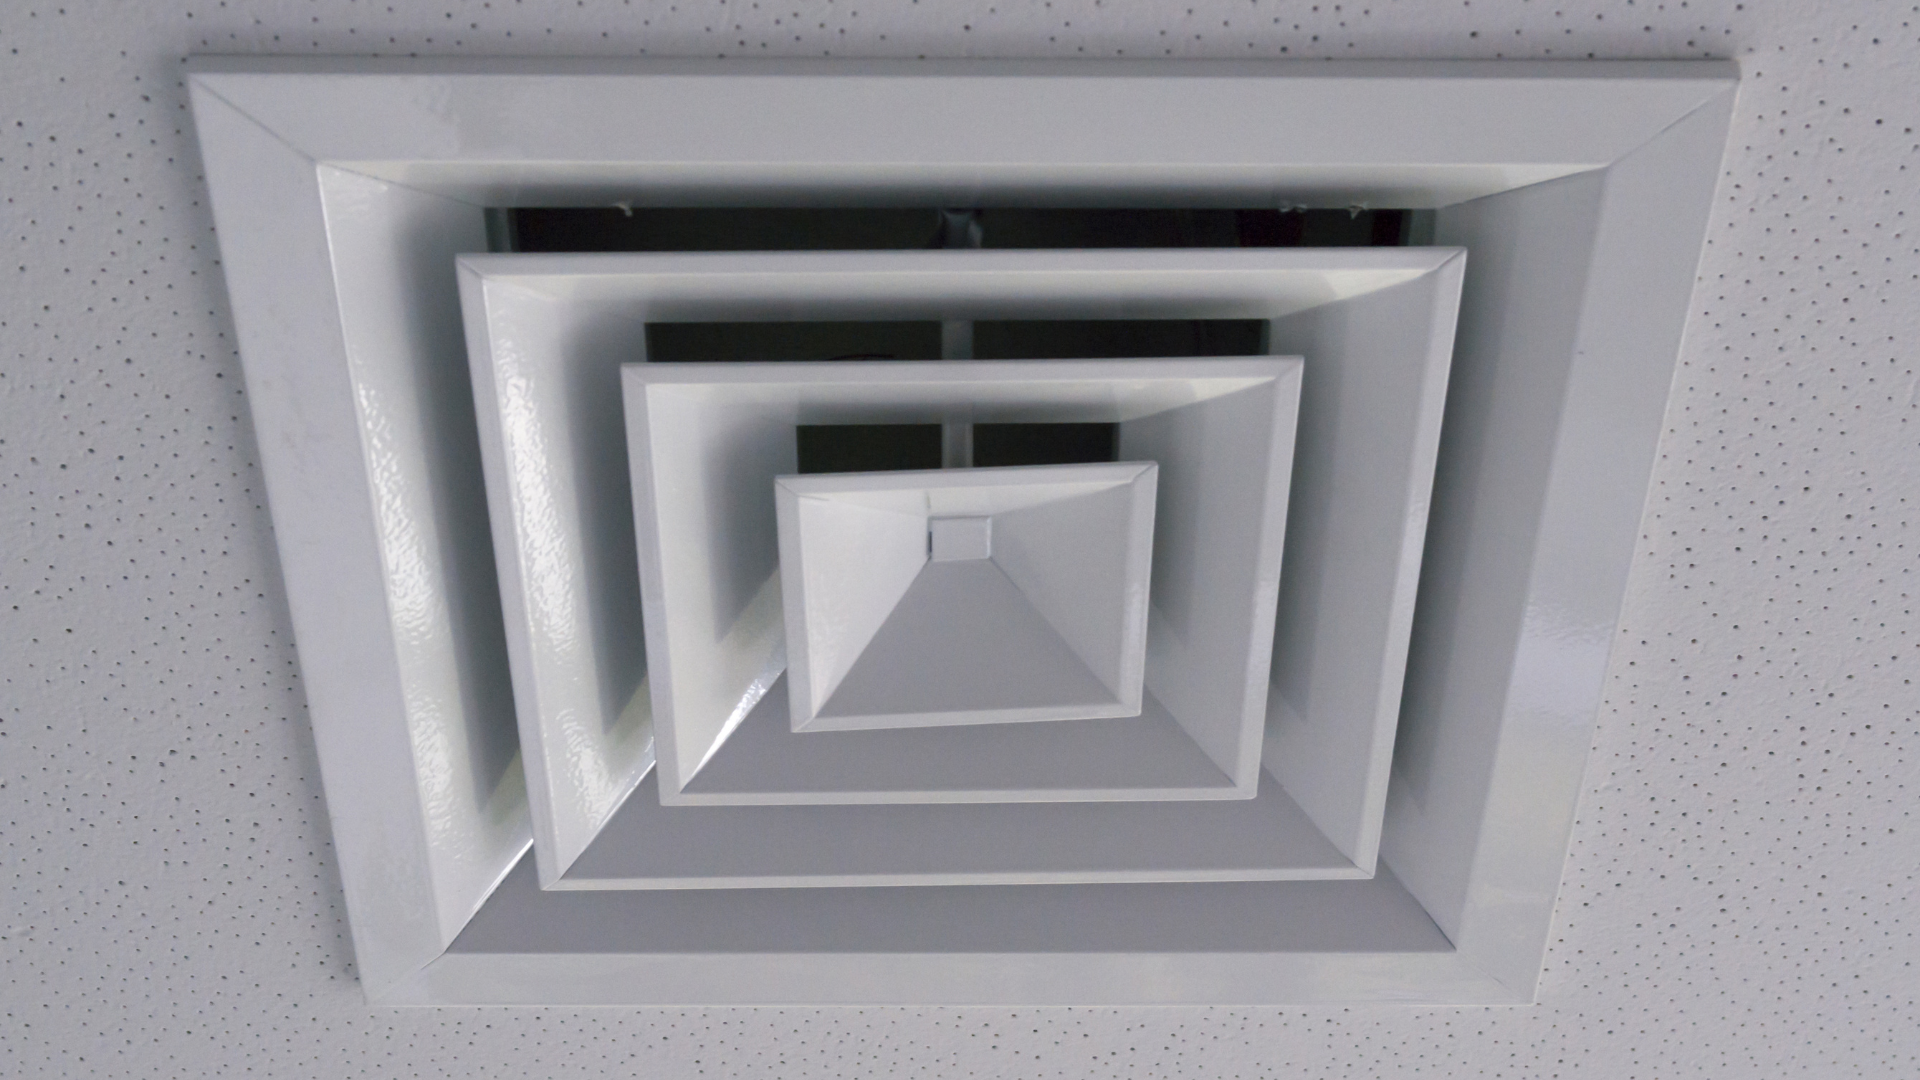 extractor fan in the ceiling